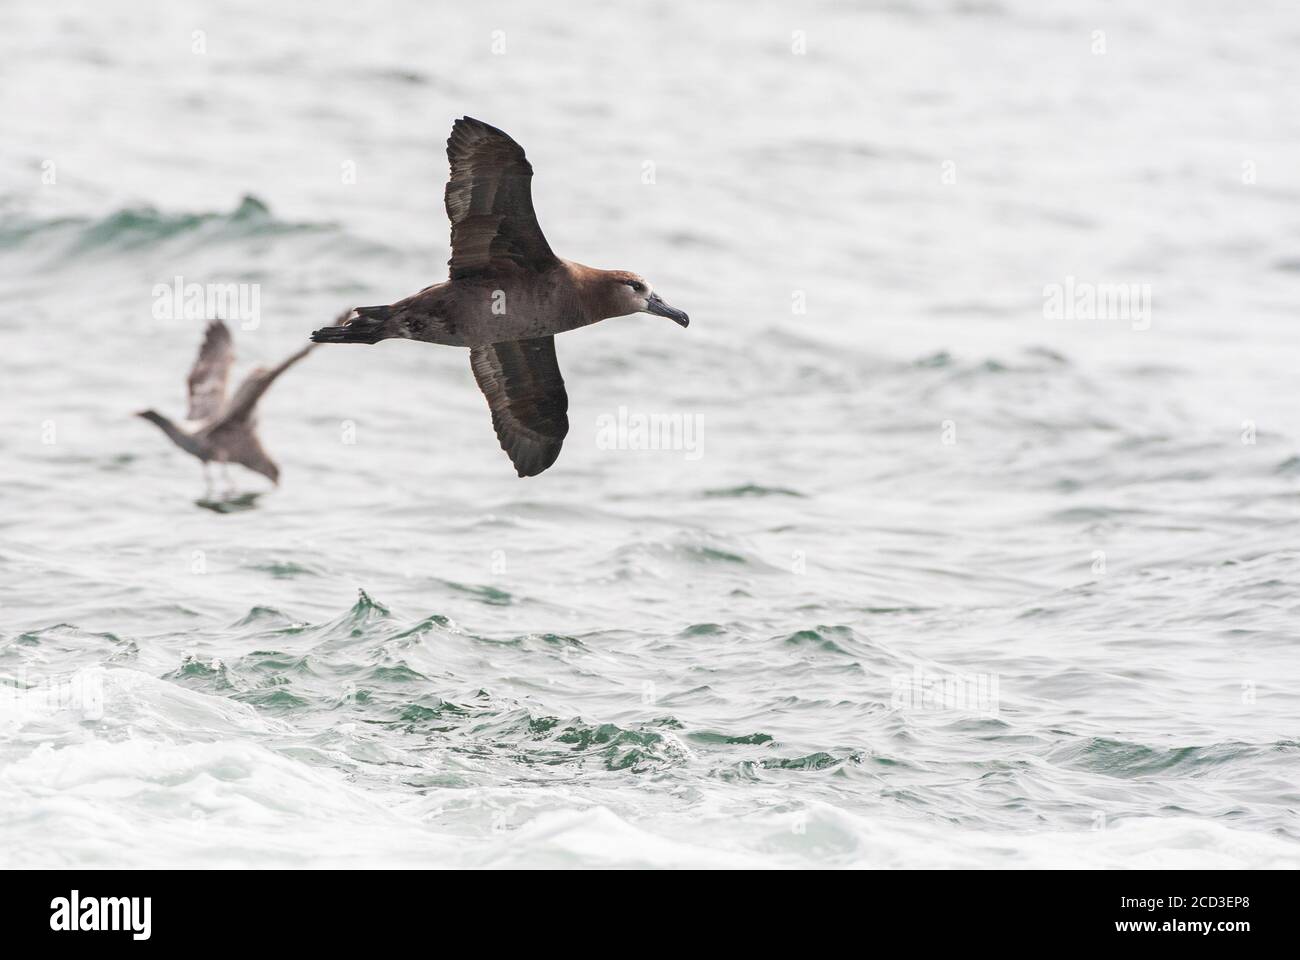 black-footed albatross (Diomedea nigripes, Phoebastria nigripes), flying, one Gull in the background, USA, California, Monterey Stock Photo